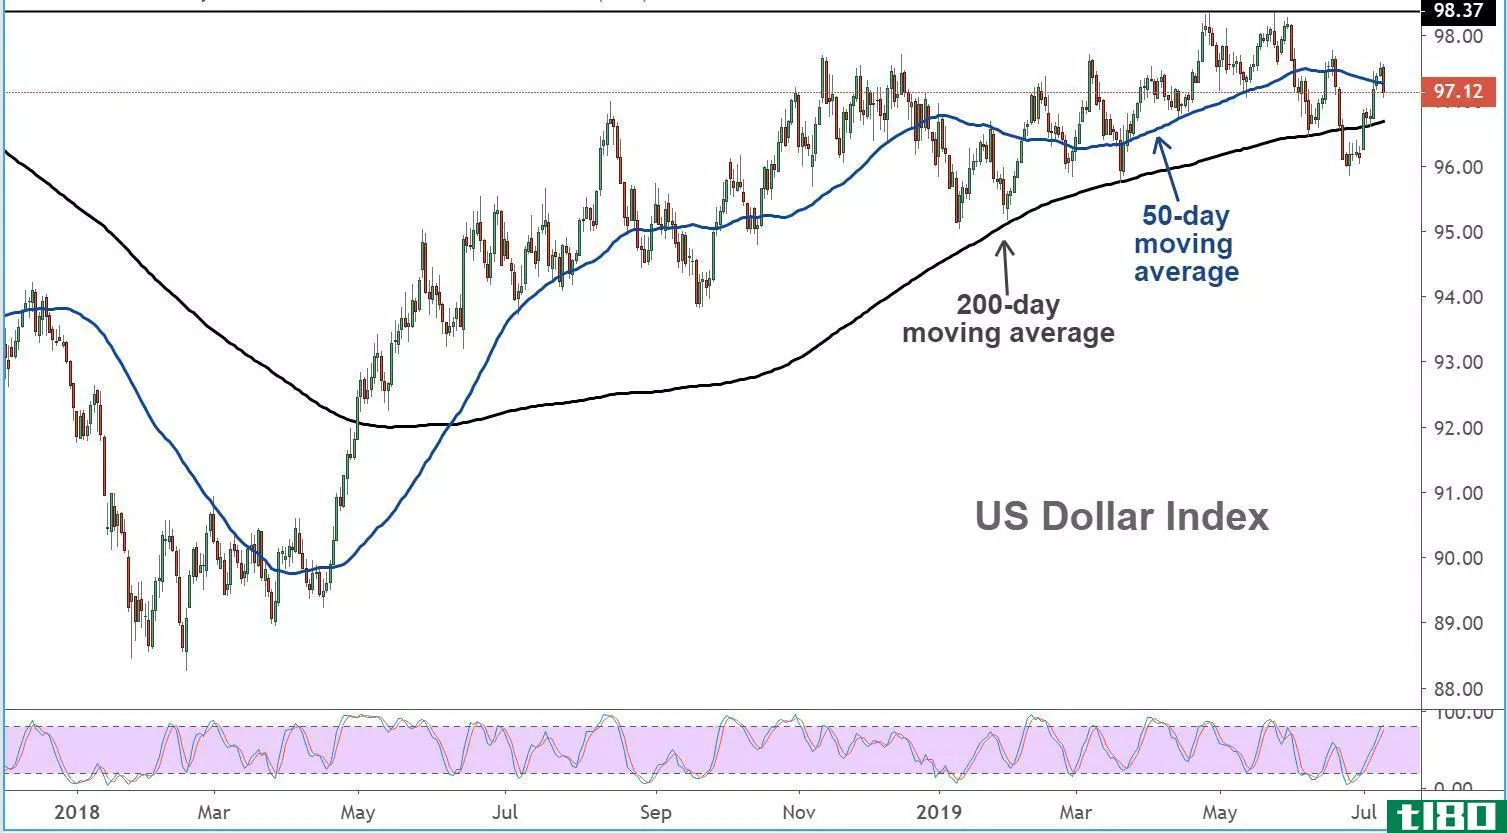 Chart showing the performance of the U.S. dollar index